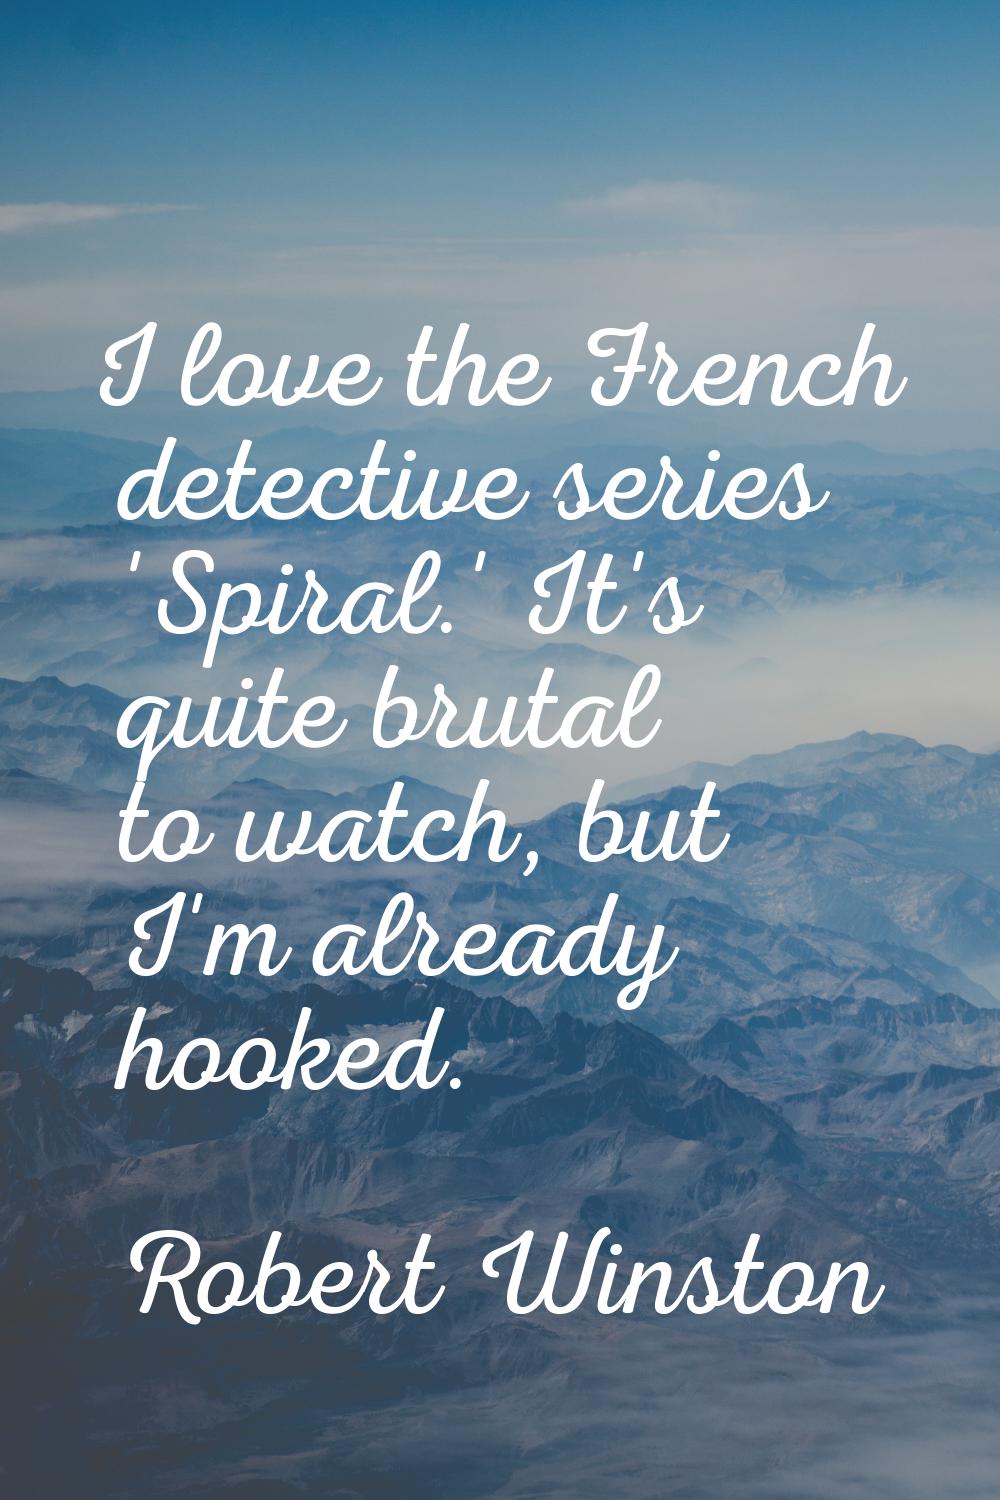 I love the French detective series 'Spiral.' It's quite brutal to watch, but I'm already hooked.